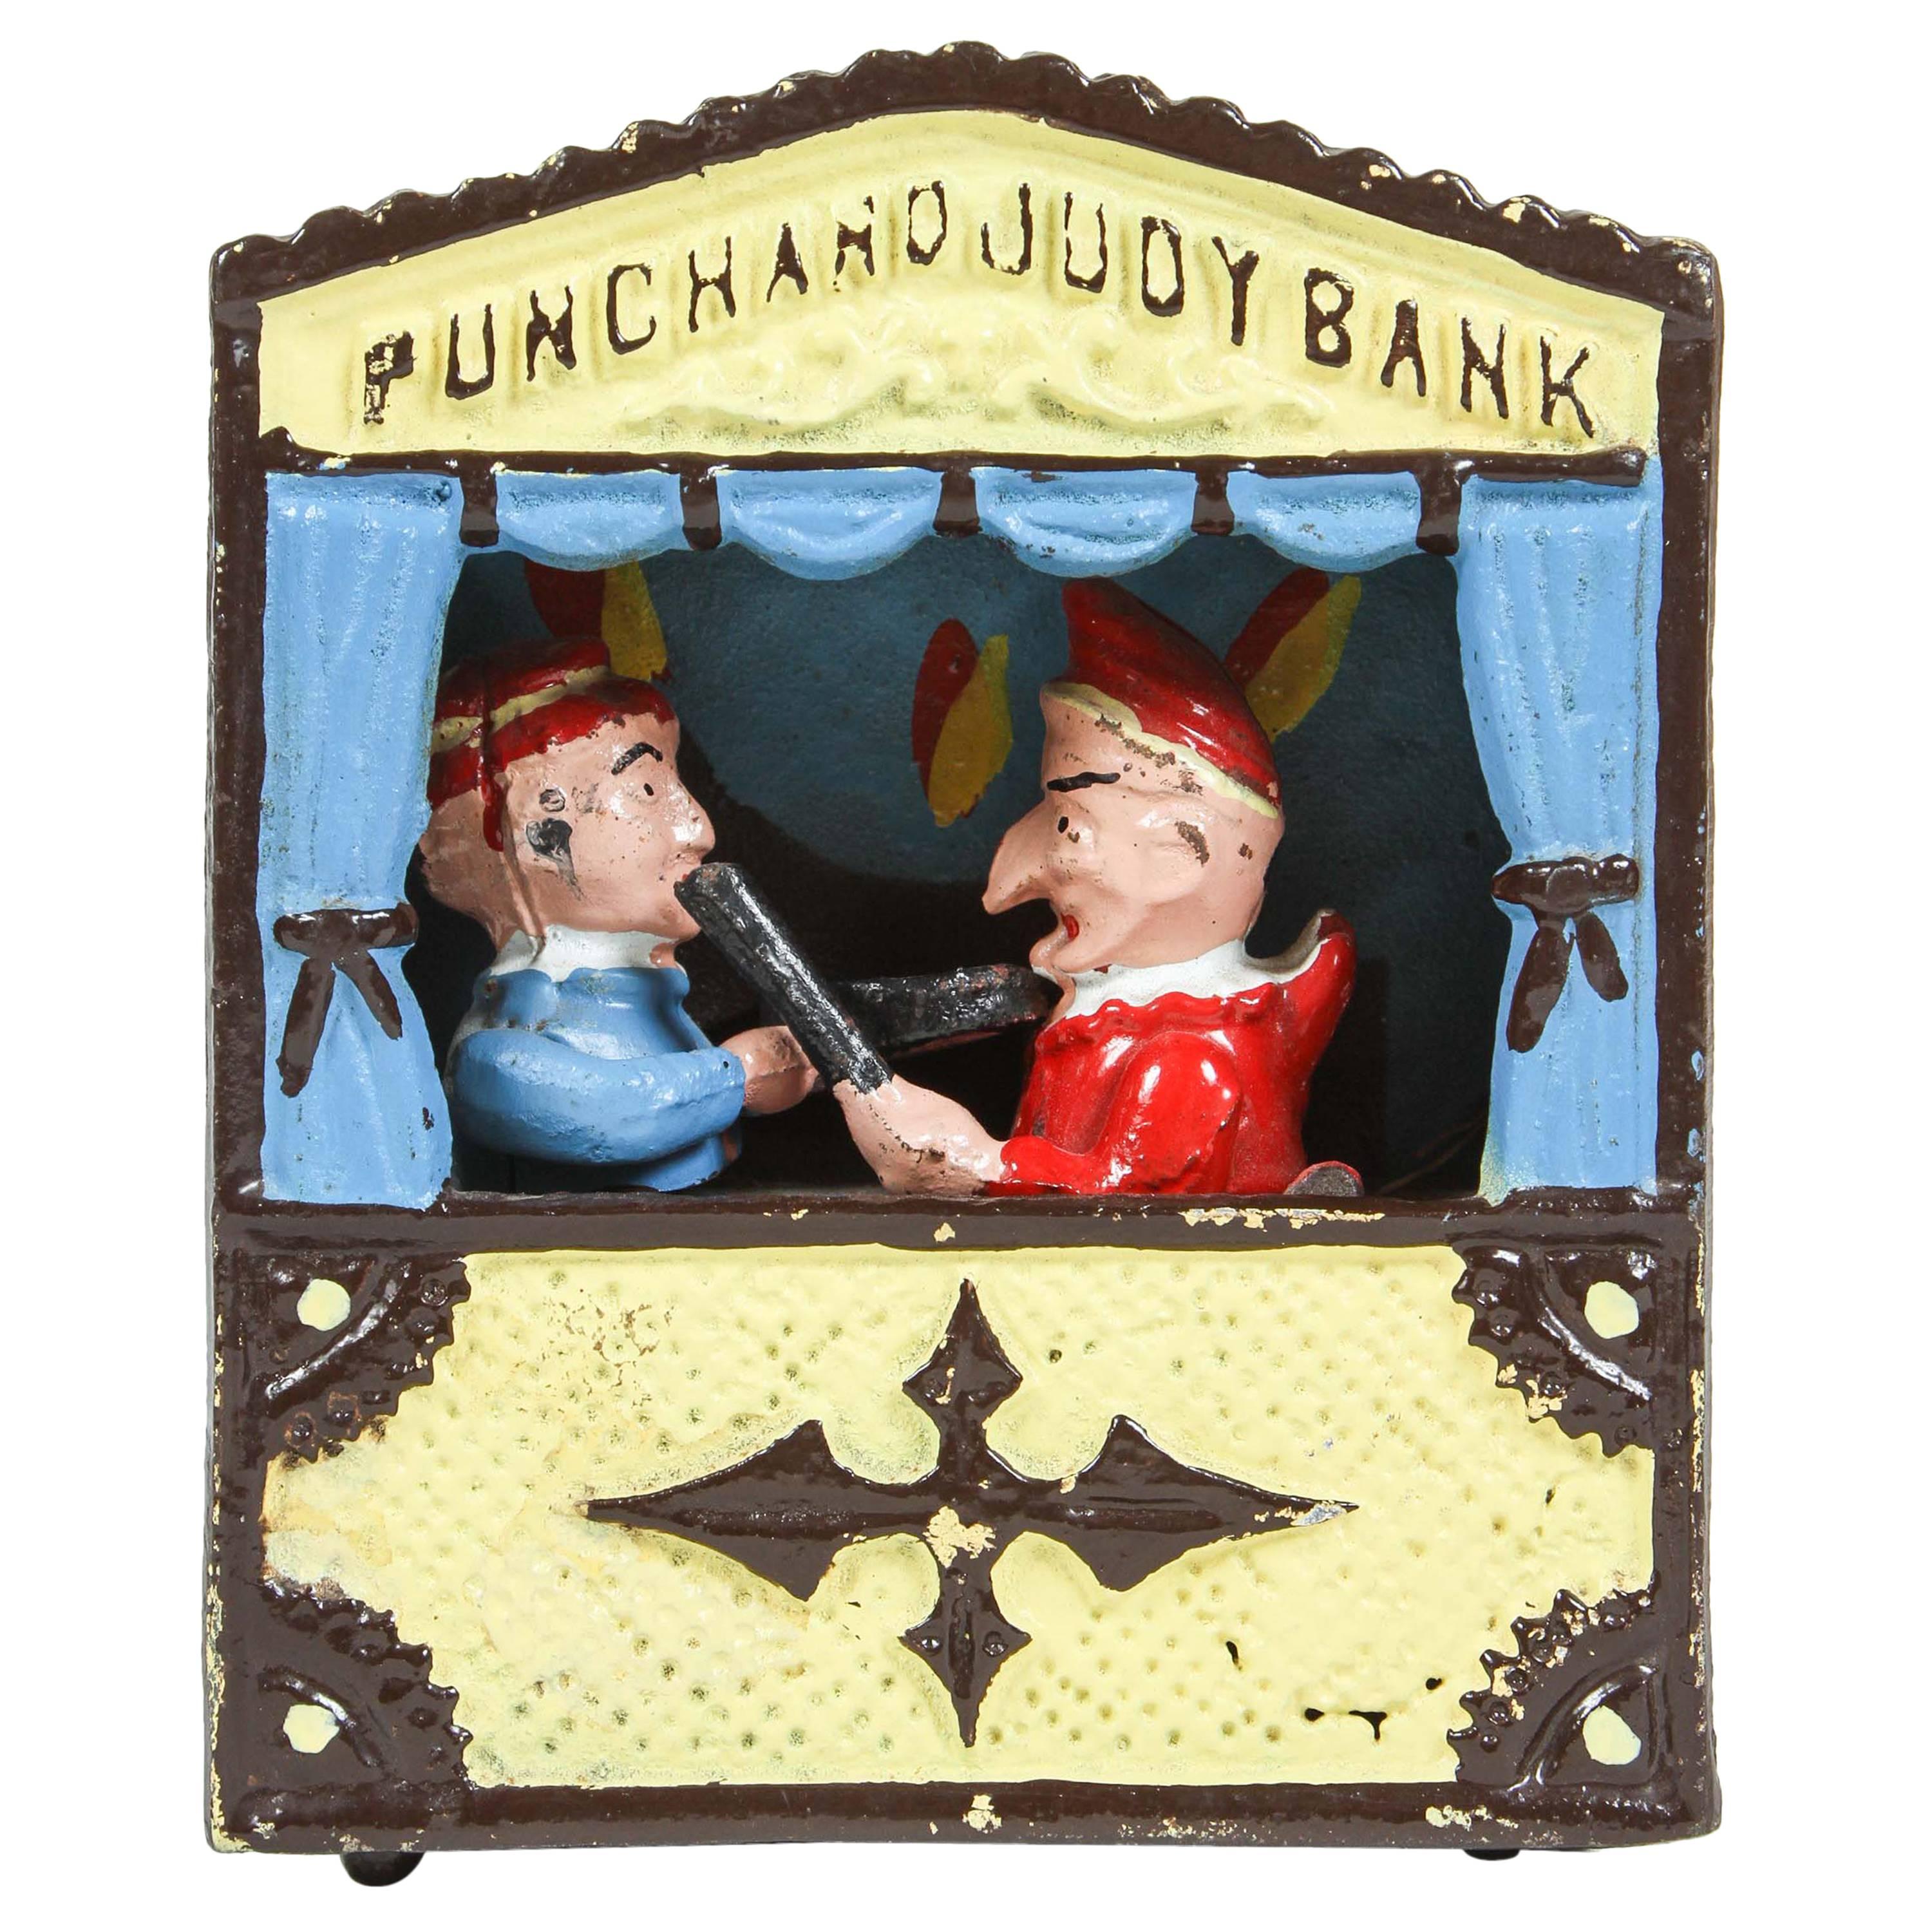 Vintage Cast Iron Book of Knowledge Mechanical Bank, Punch & Judy, 20th Century For Sale